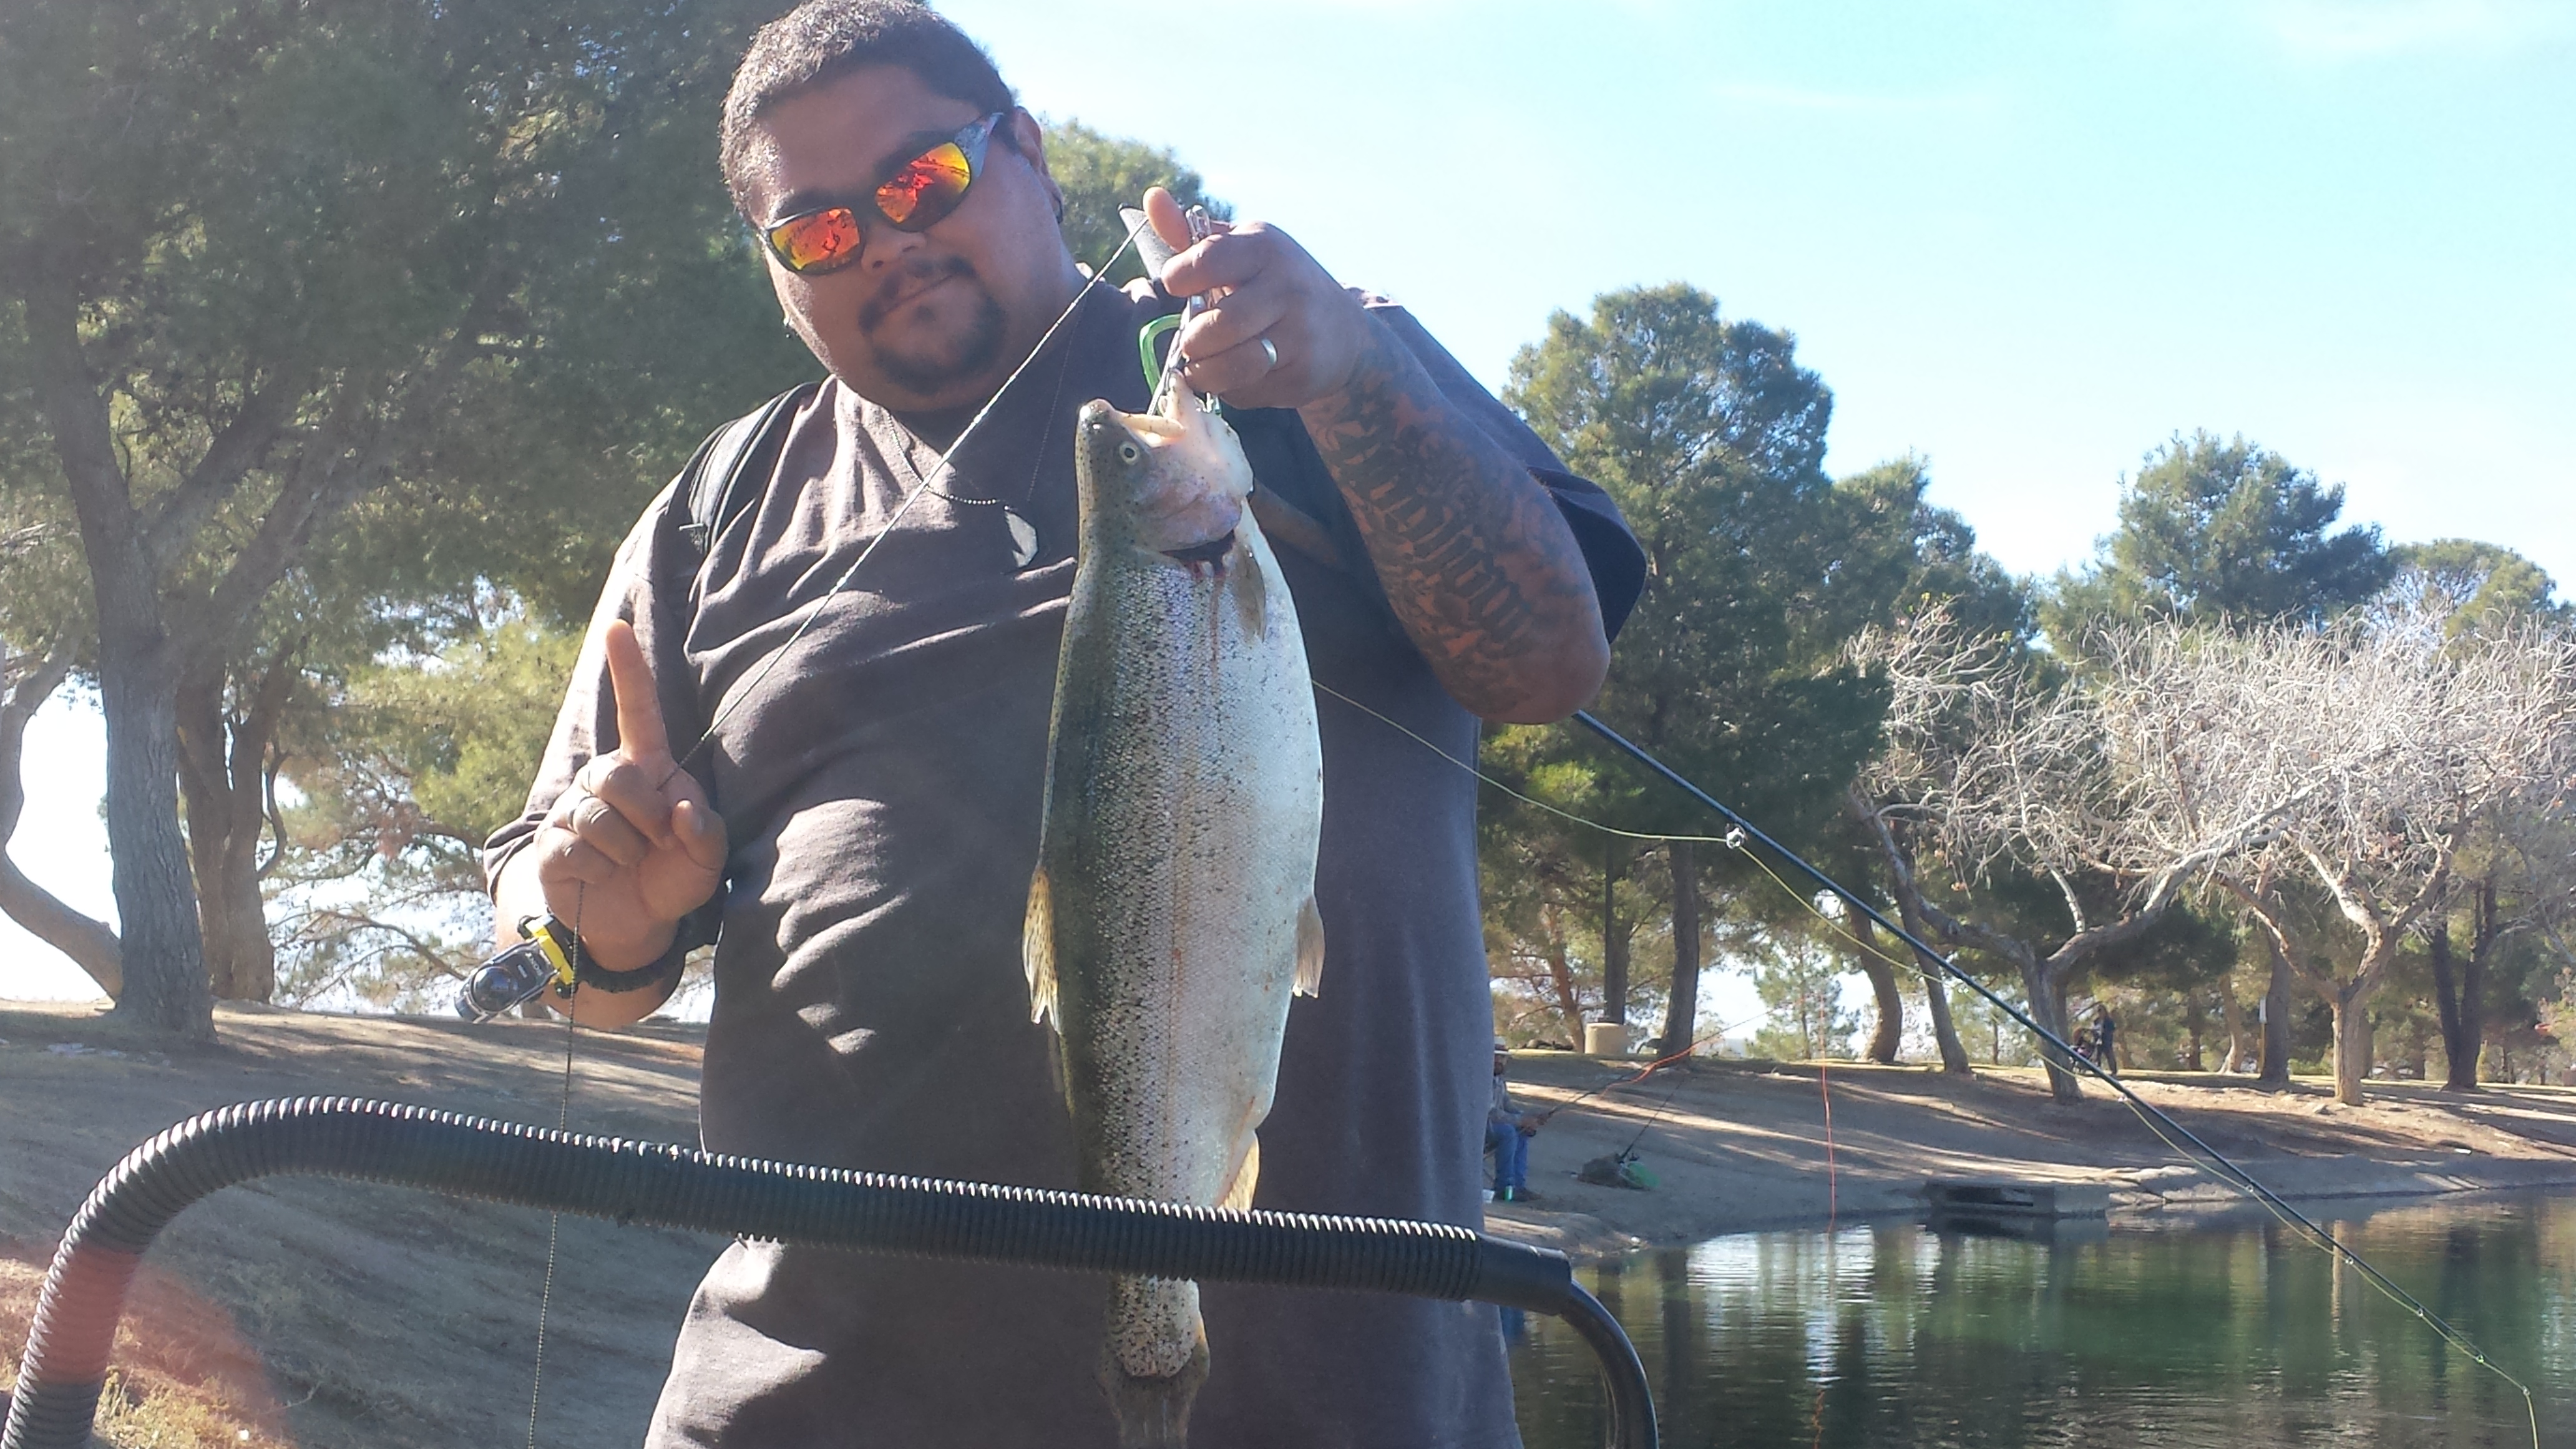 i used a wolly bugger and a little xxxblood peach and rubbed it on the fly soon here this fish came and hooked up....video also on ebaums and youtube search oXAPHIANo